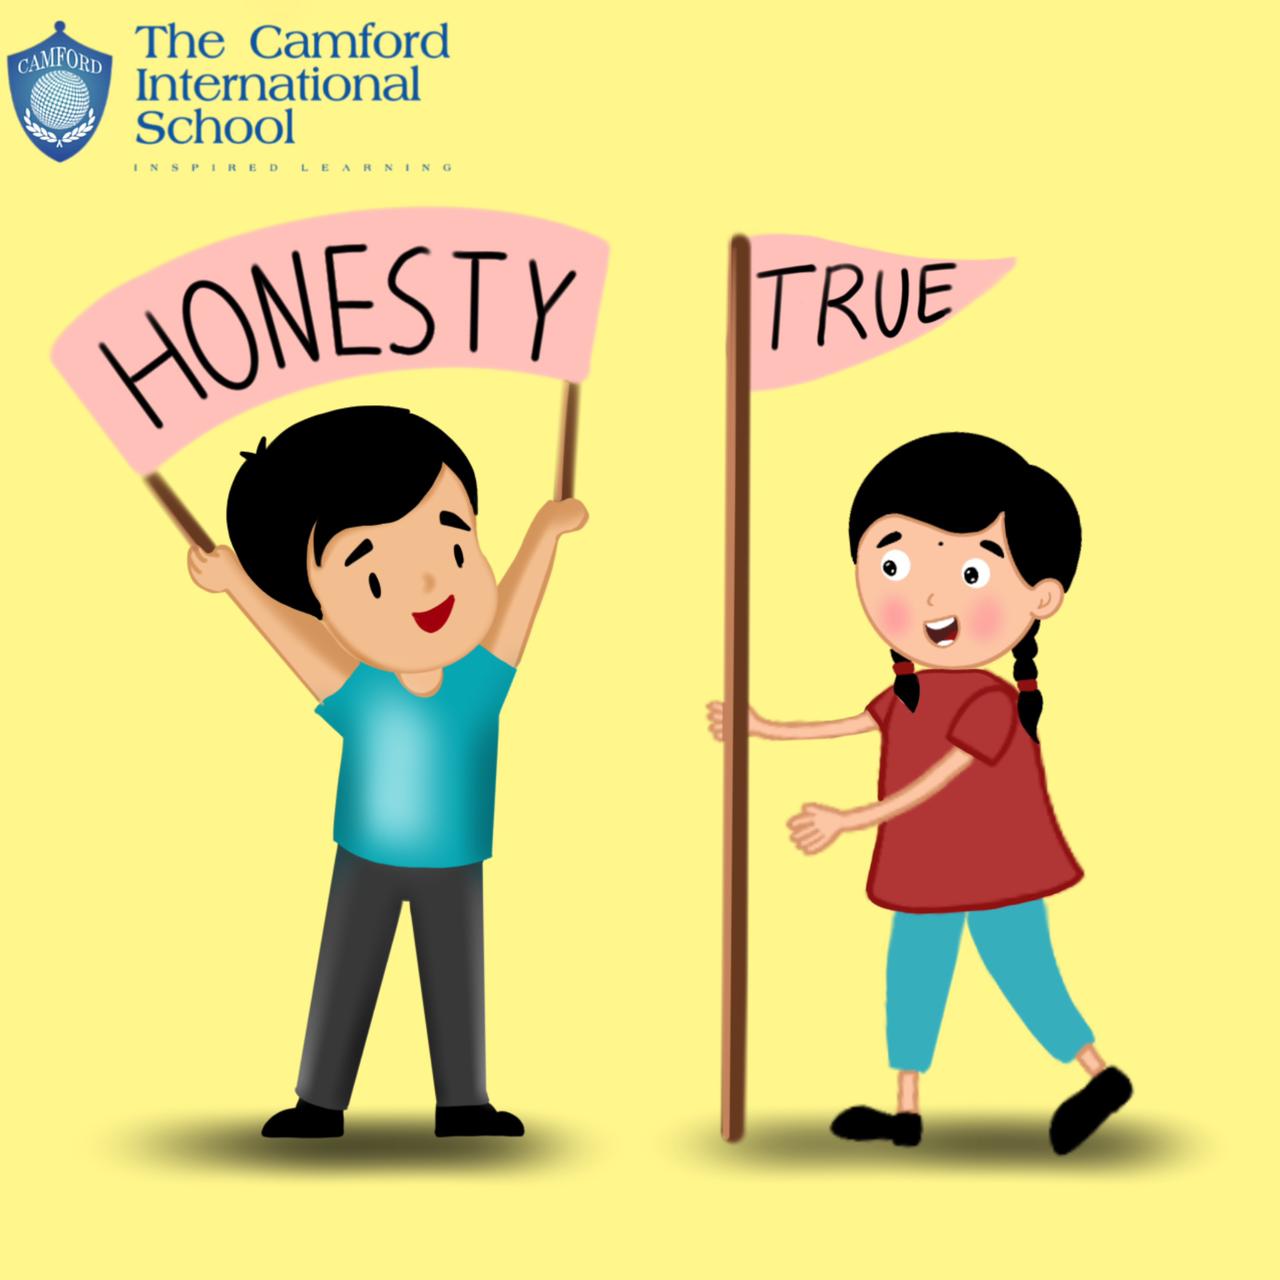 Honesty is always the best policy - The Camford International School |  